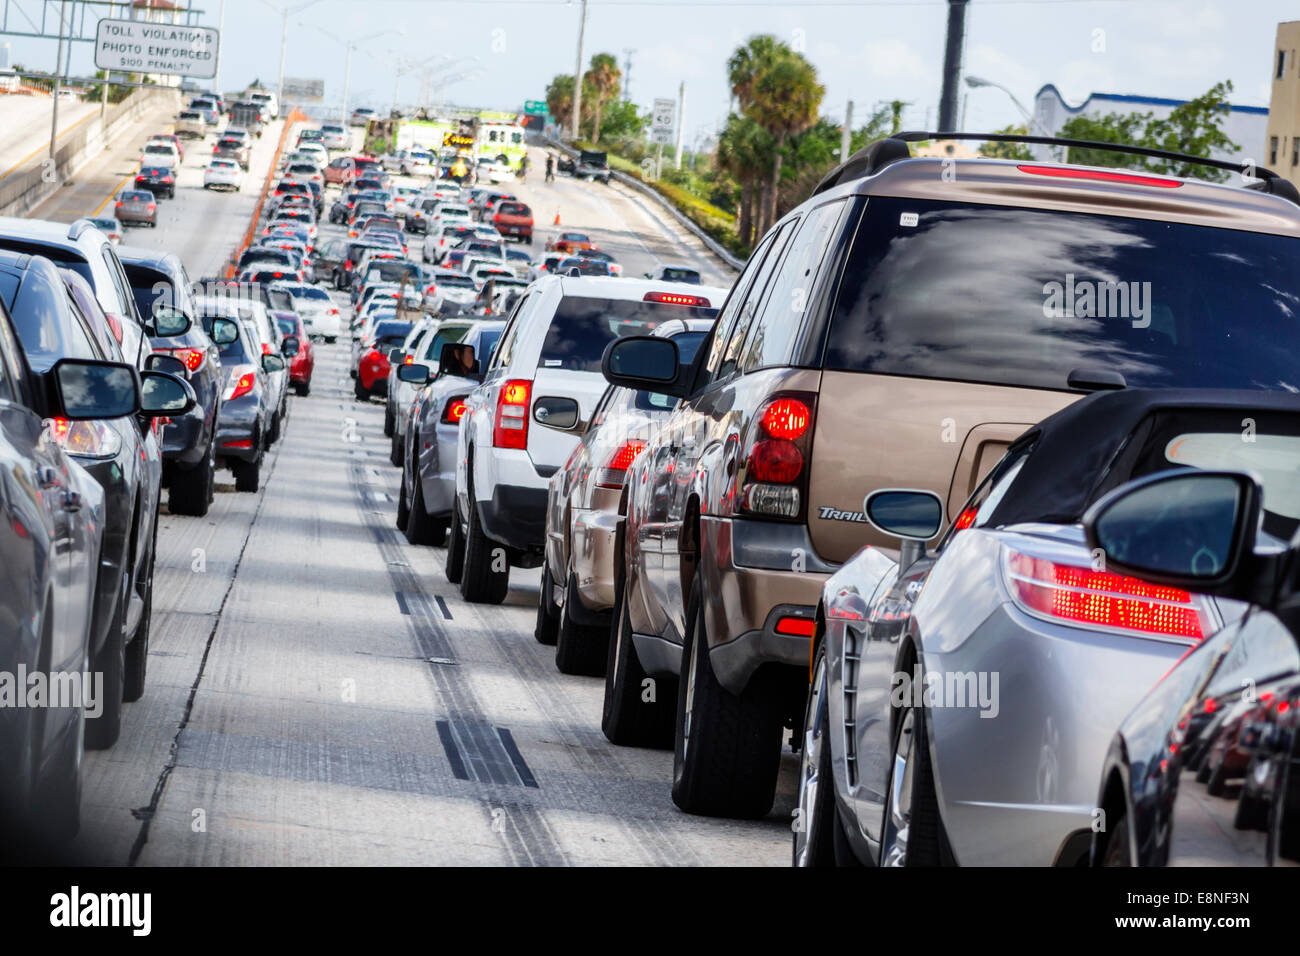 Miami Florida,Interstate I-95,highway,traffic,stopped,slowed,jam,closed lanes,accident,cars,automobiles,vehicles,FL140525015 Stock Photo